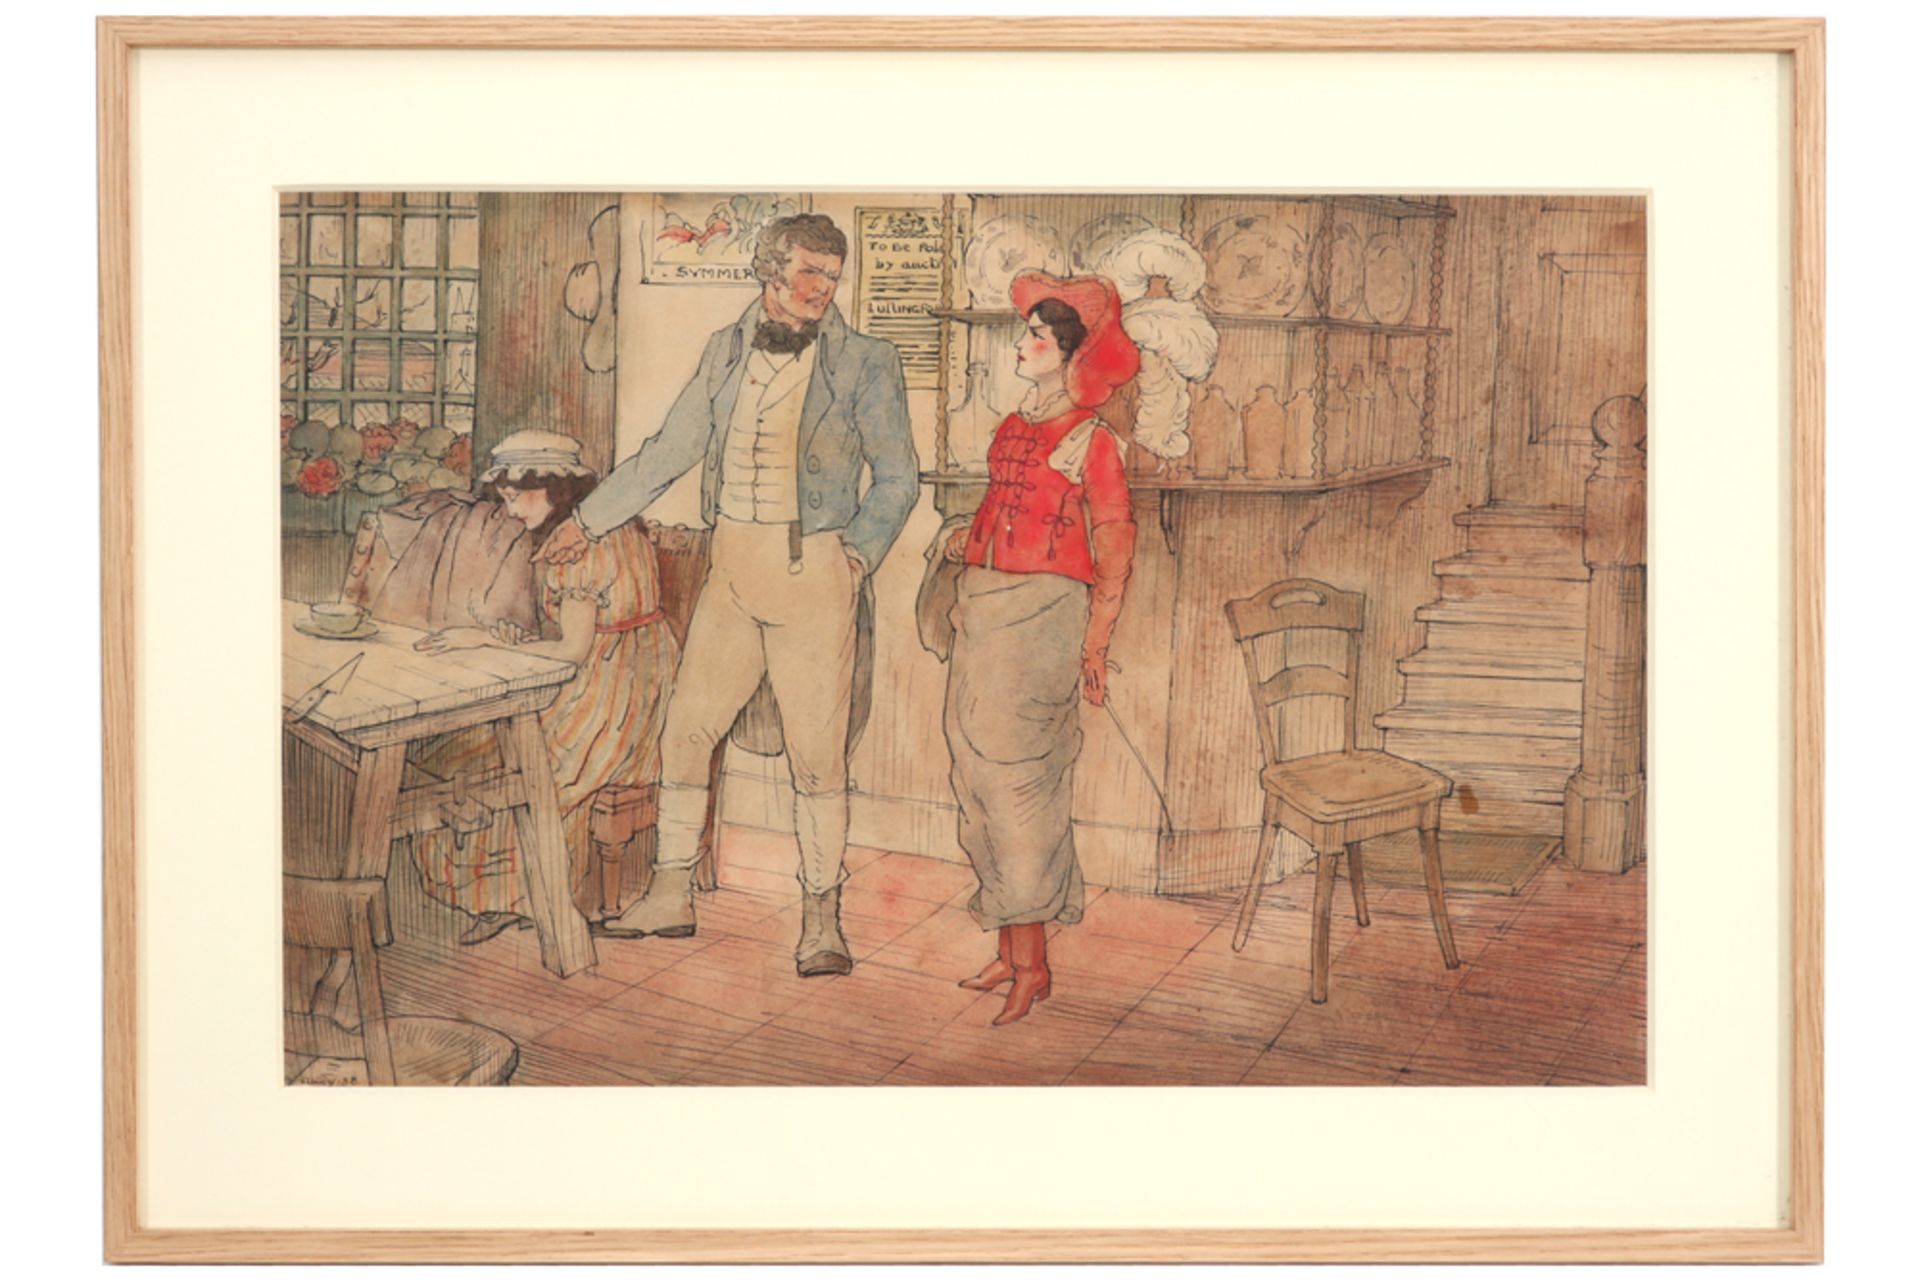 20th Cent. Belgian mixed media with an English pub scene with 'To be sold in auction' poster - - Image 3 of 3